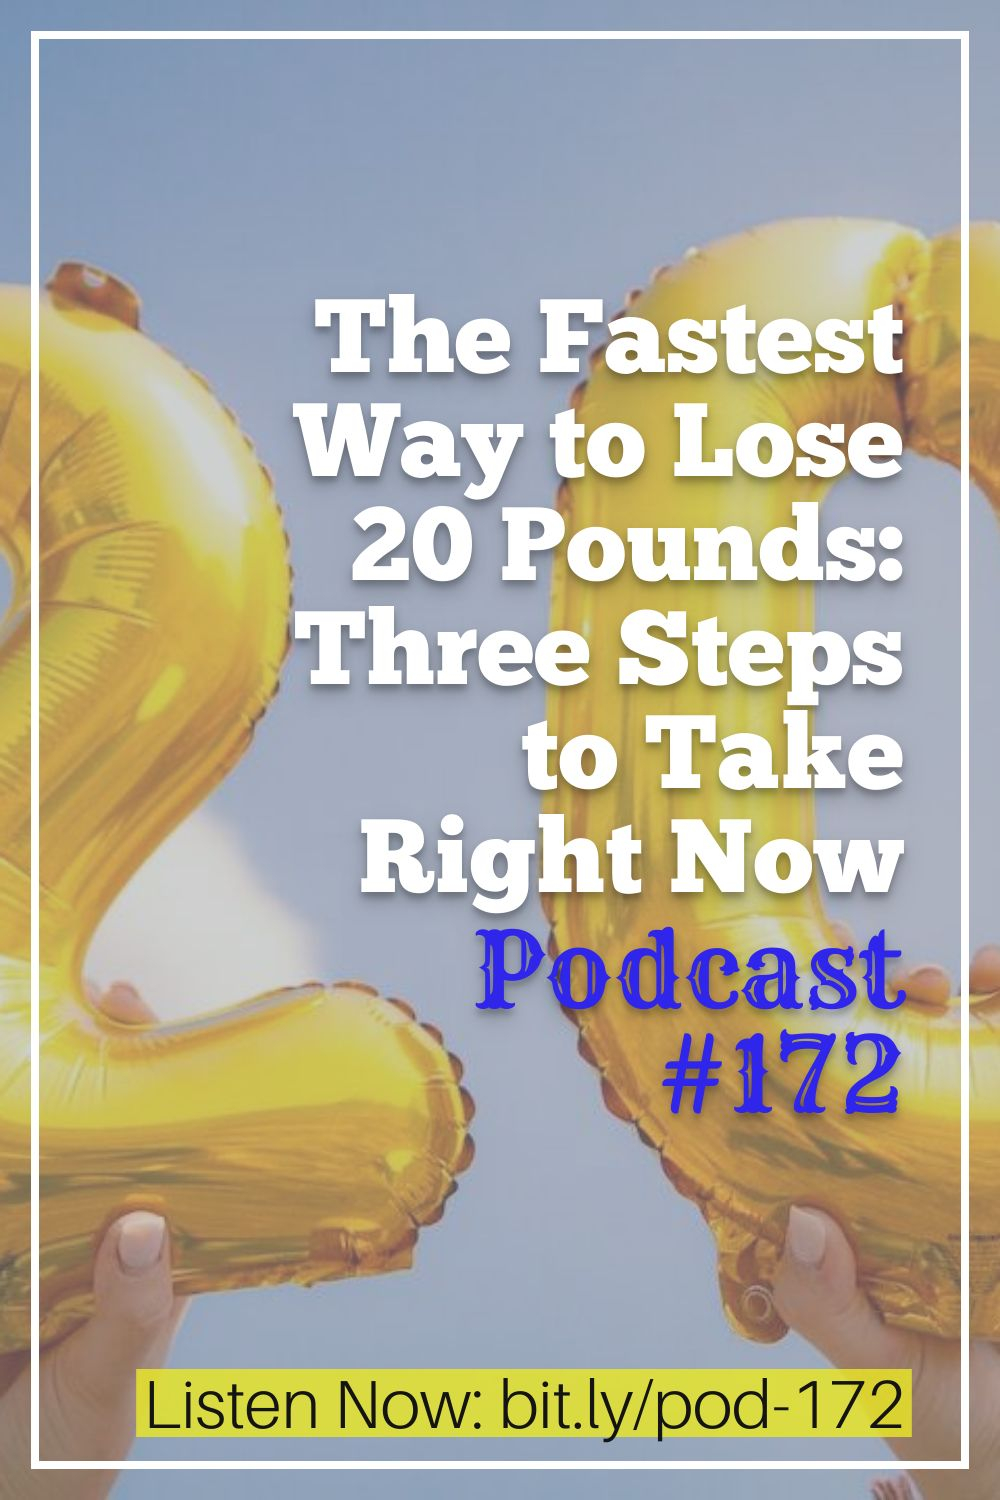 The Fastest Way to Lose 20 Pounds - 3 Steps to Take Right Now [Podcast #172]